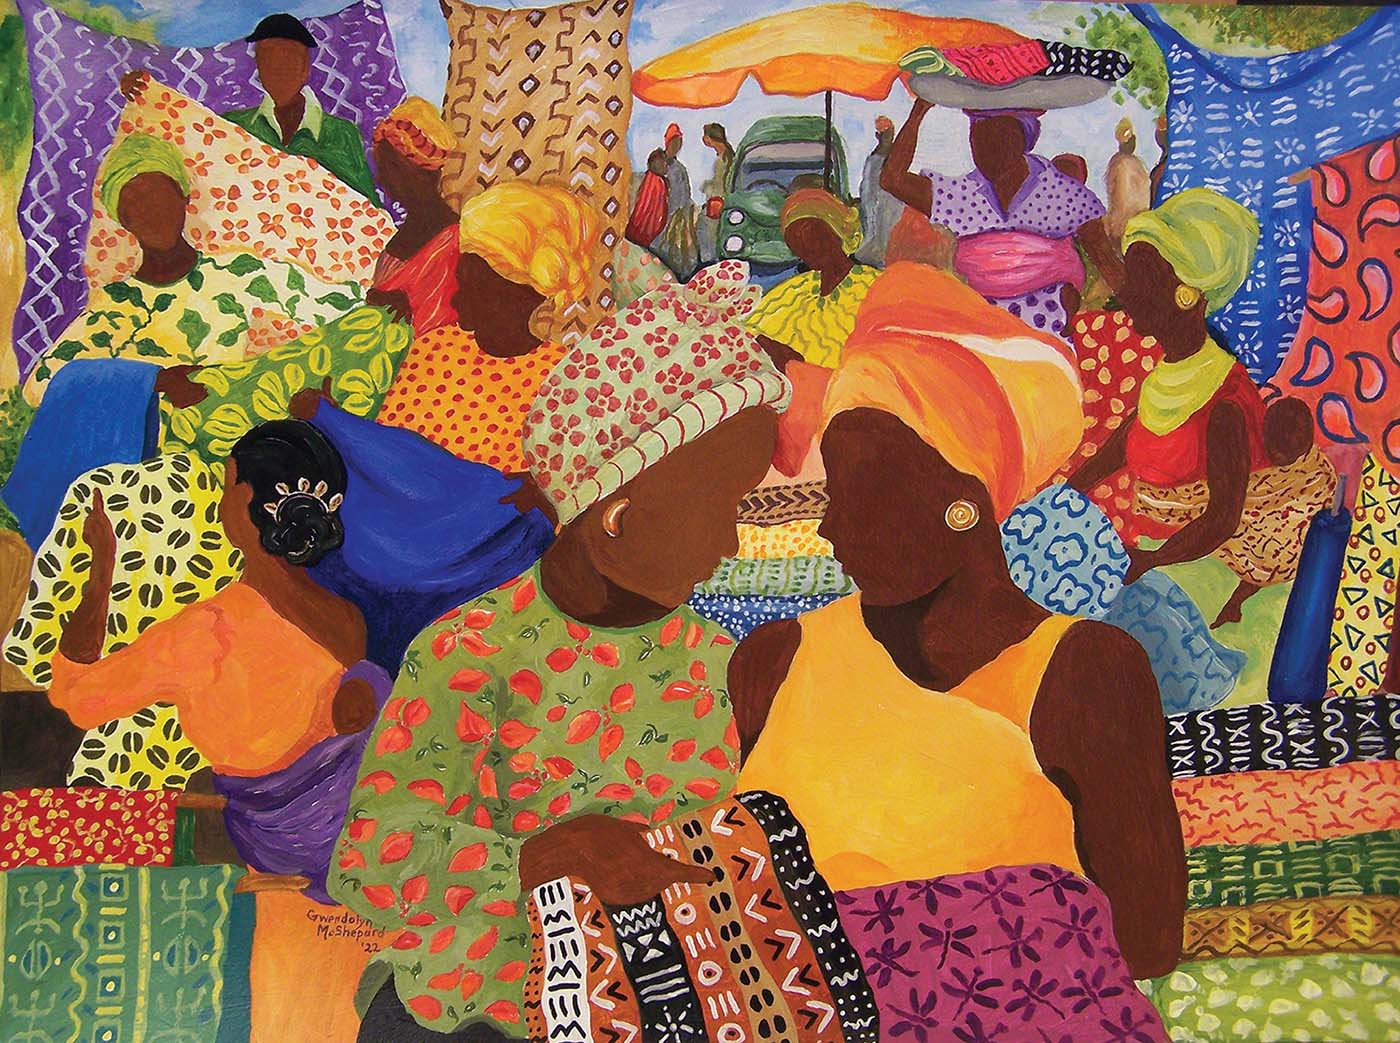 Buying Cloth People Of Color Jigsaw Puzzle